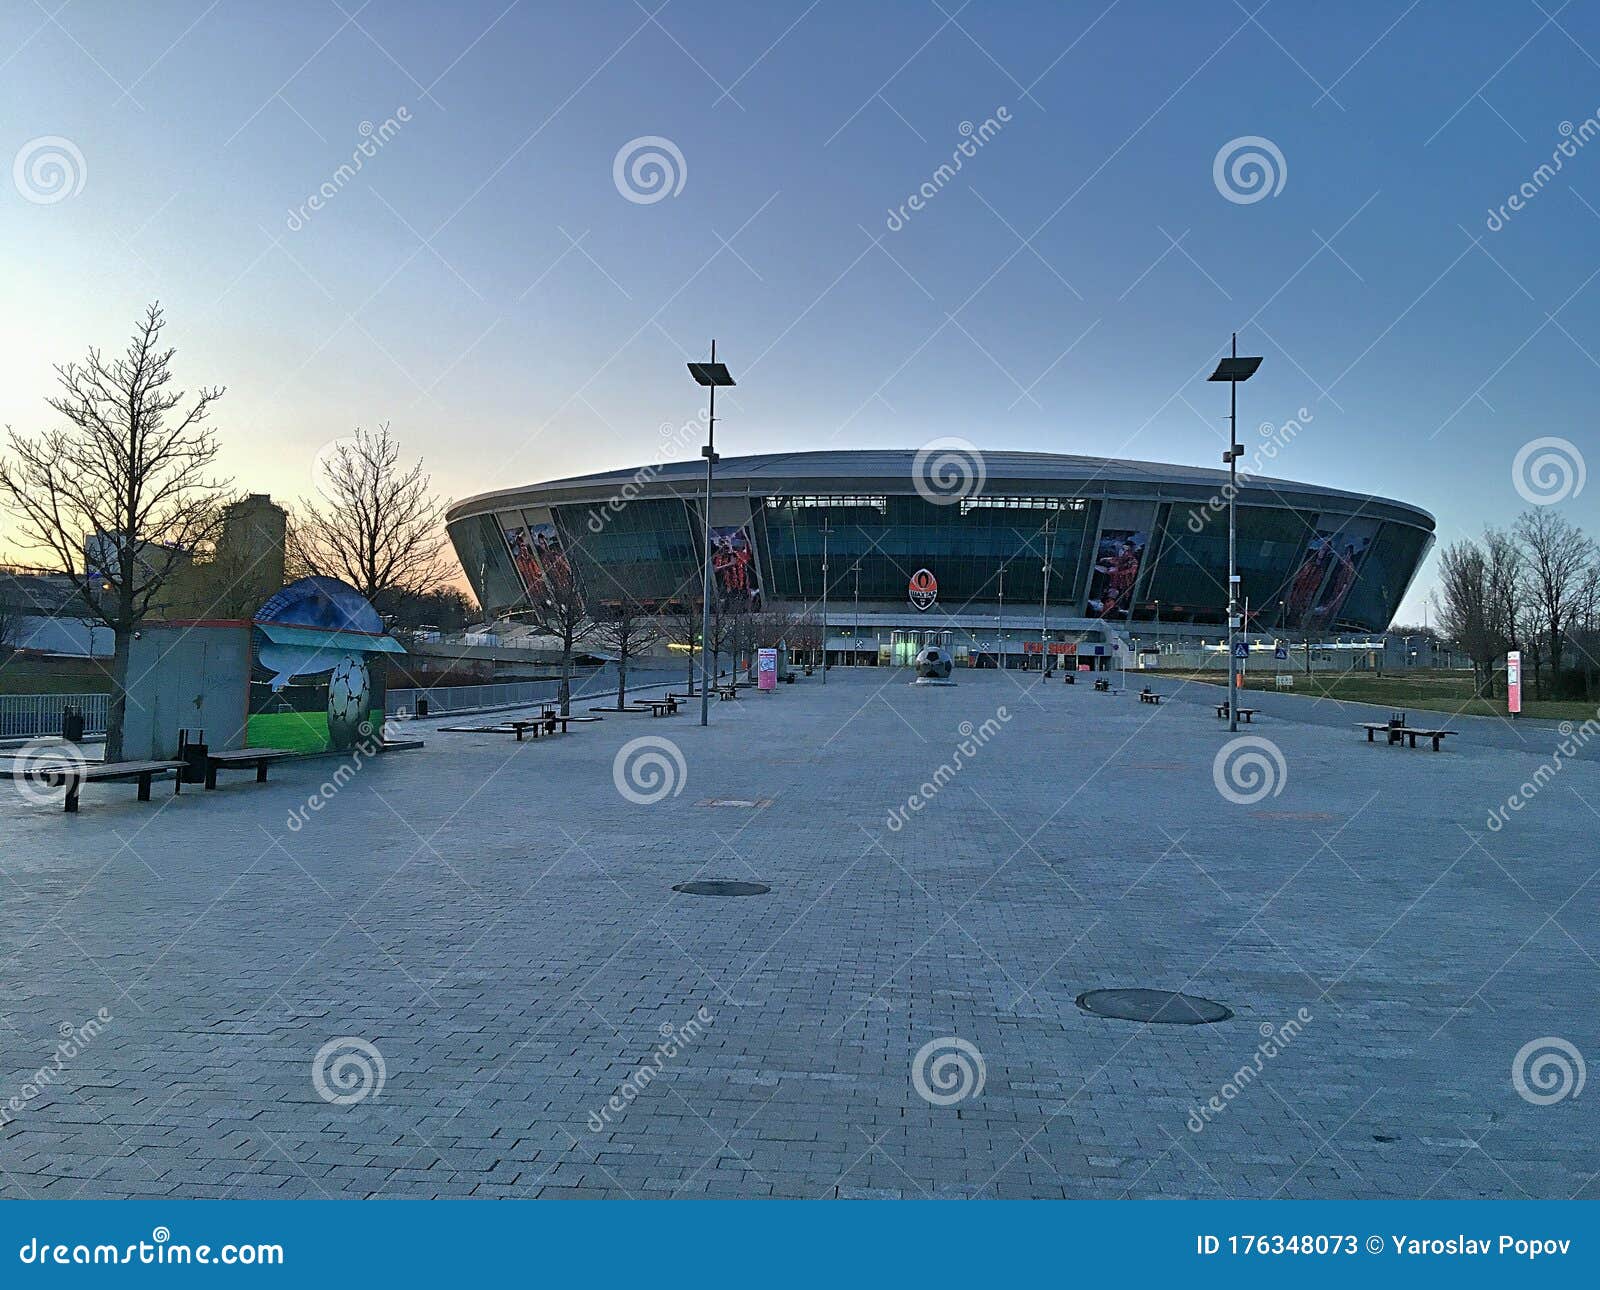 The Main Entrance To The Football Stadium Of The Shakhtar Club. Sights